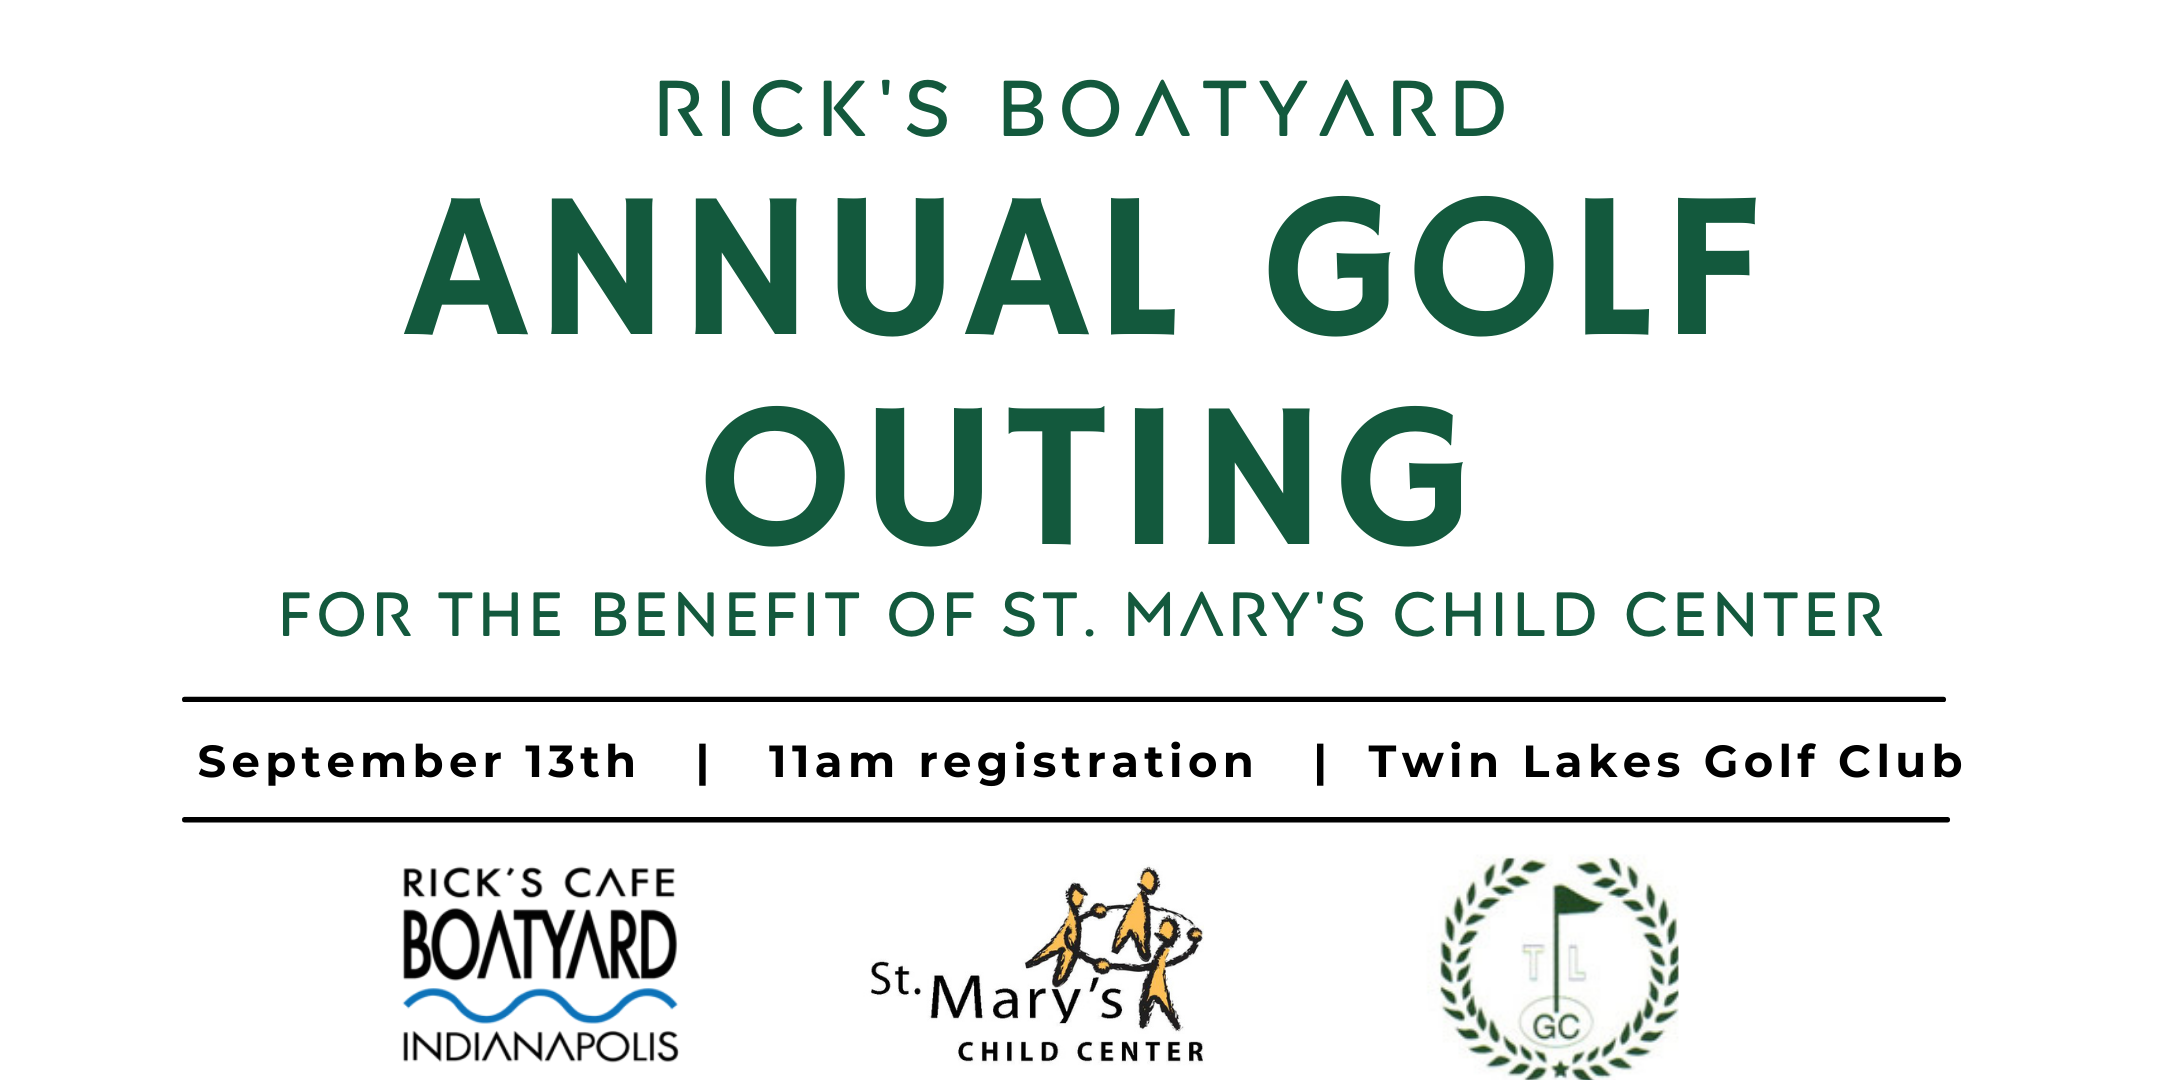 Rick's Boatyard Annual Golf Outing